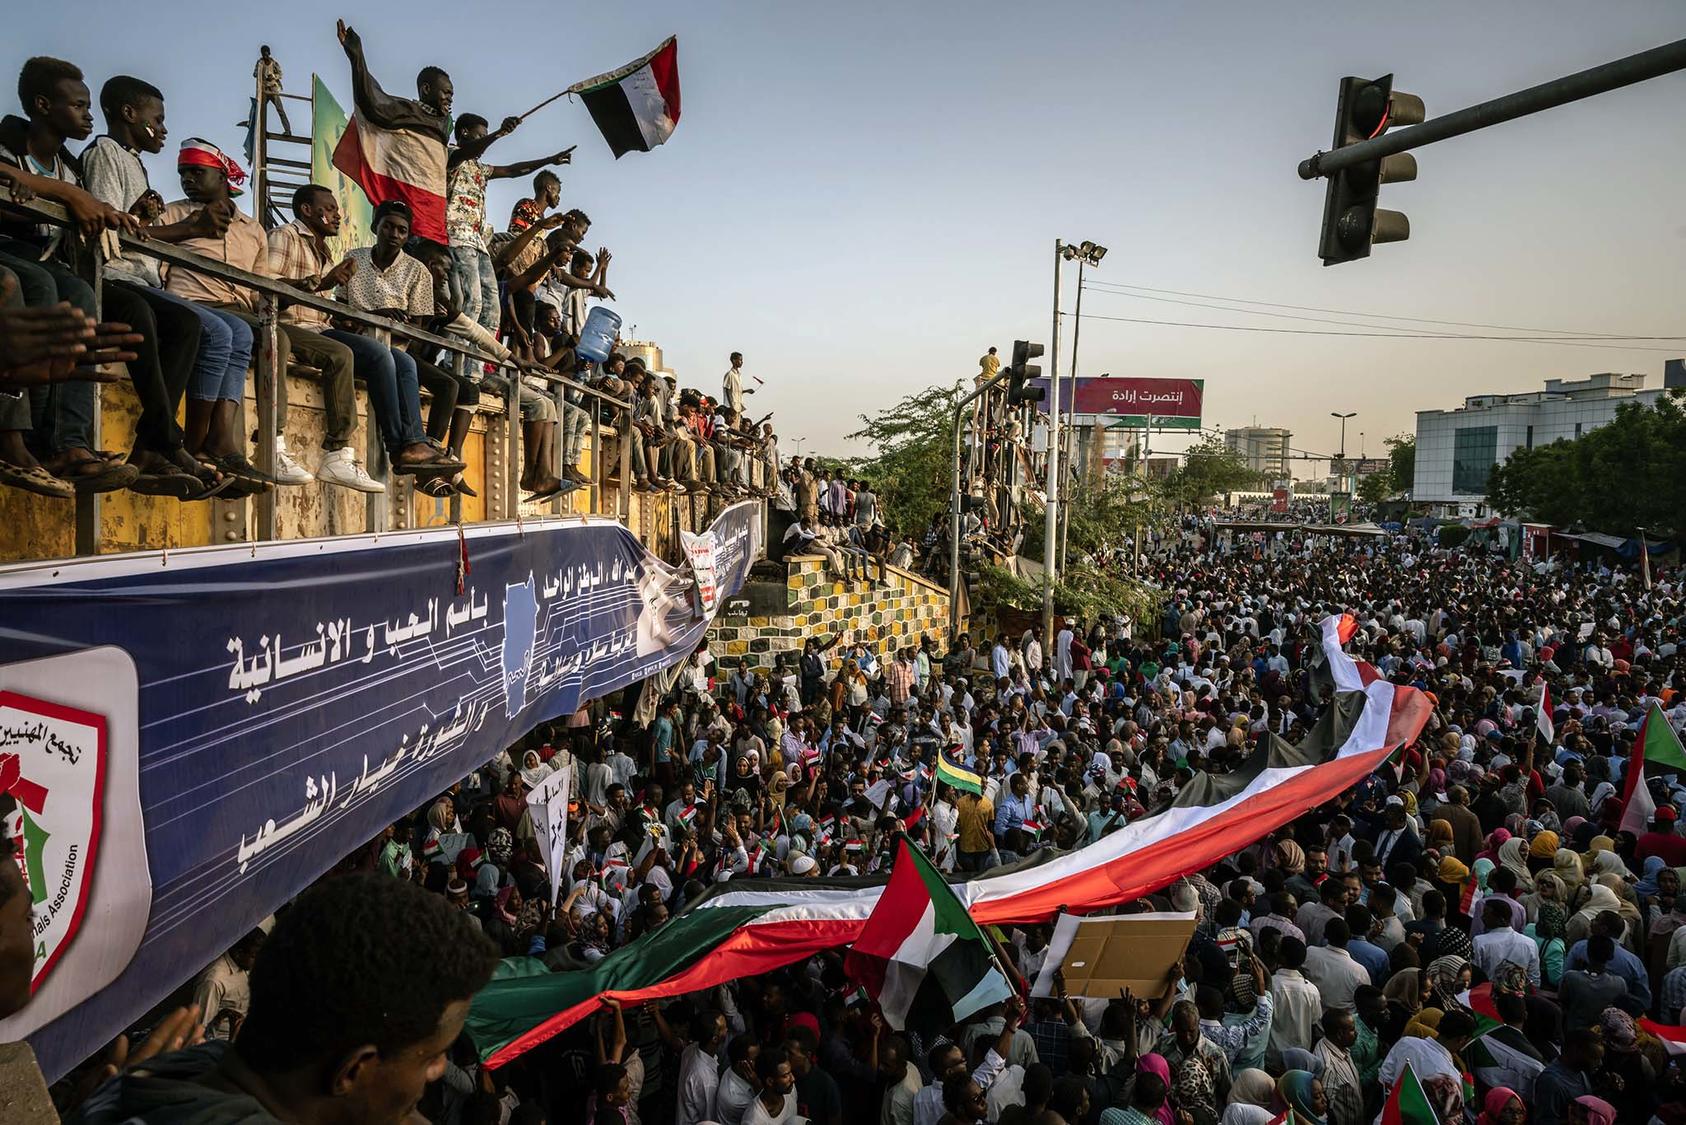 An anti-government protest rally outside military headquarters in Khartoum, Sudan, on April 22, 2019. (Bryan Denton/The New York Times)